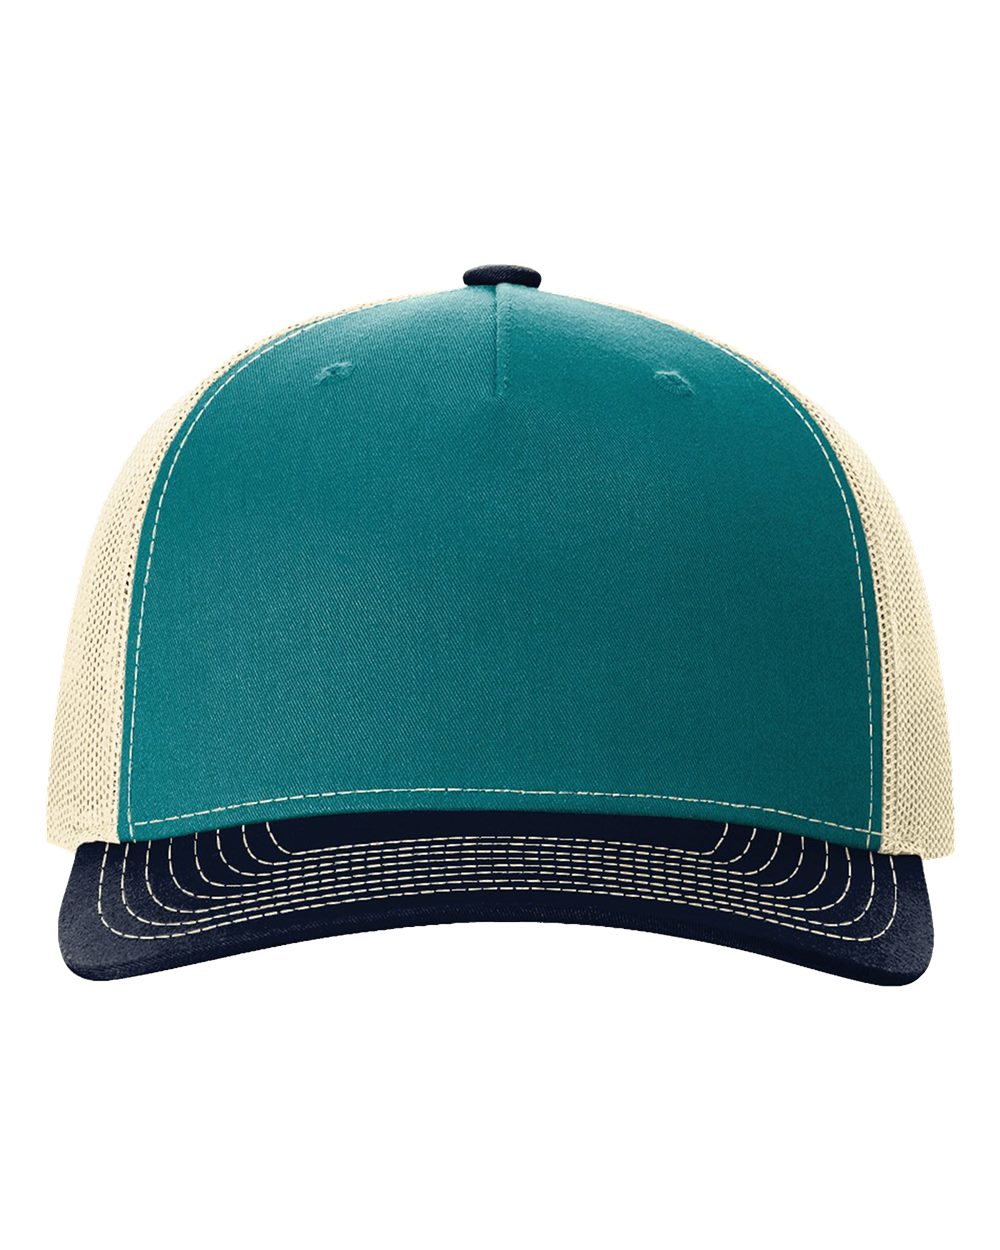 click to view Blue Teal/ Birch/ Navy